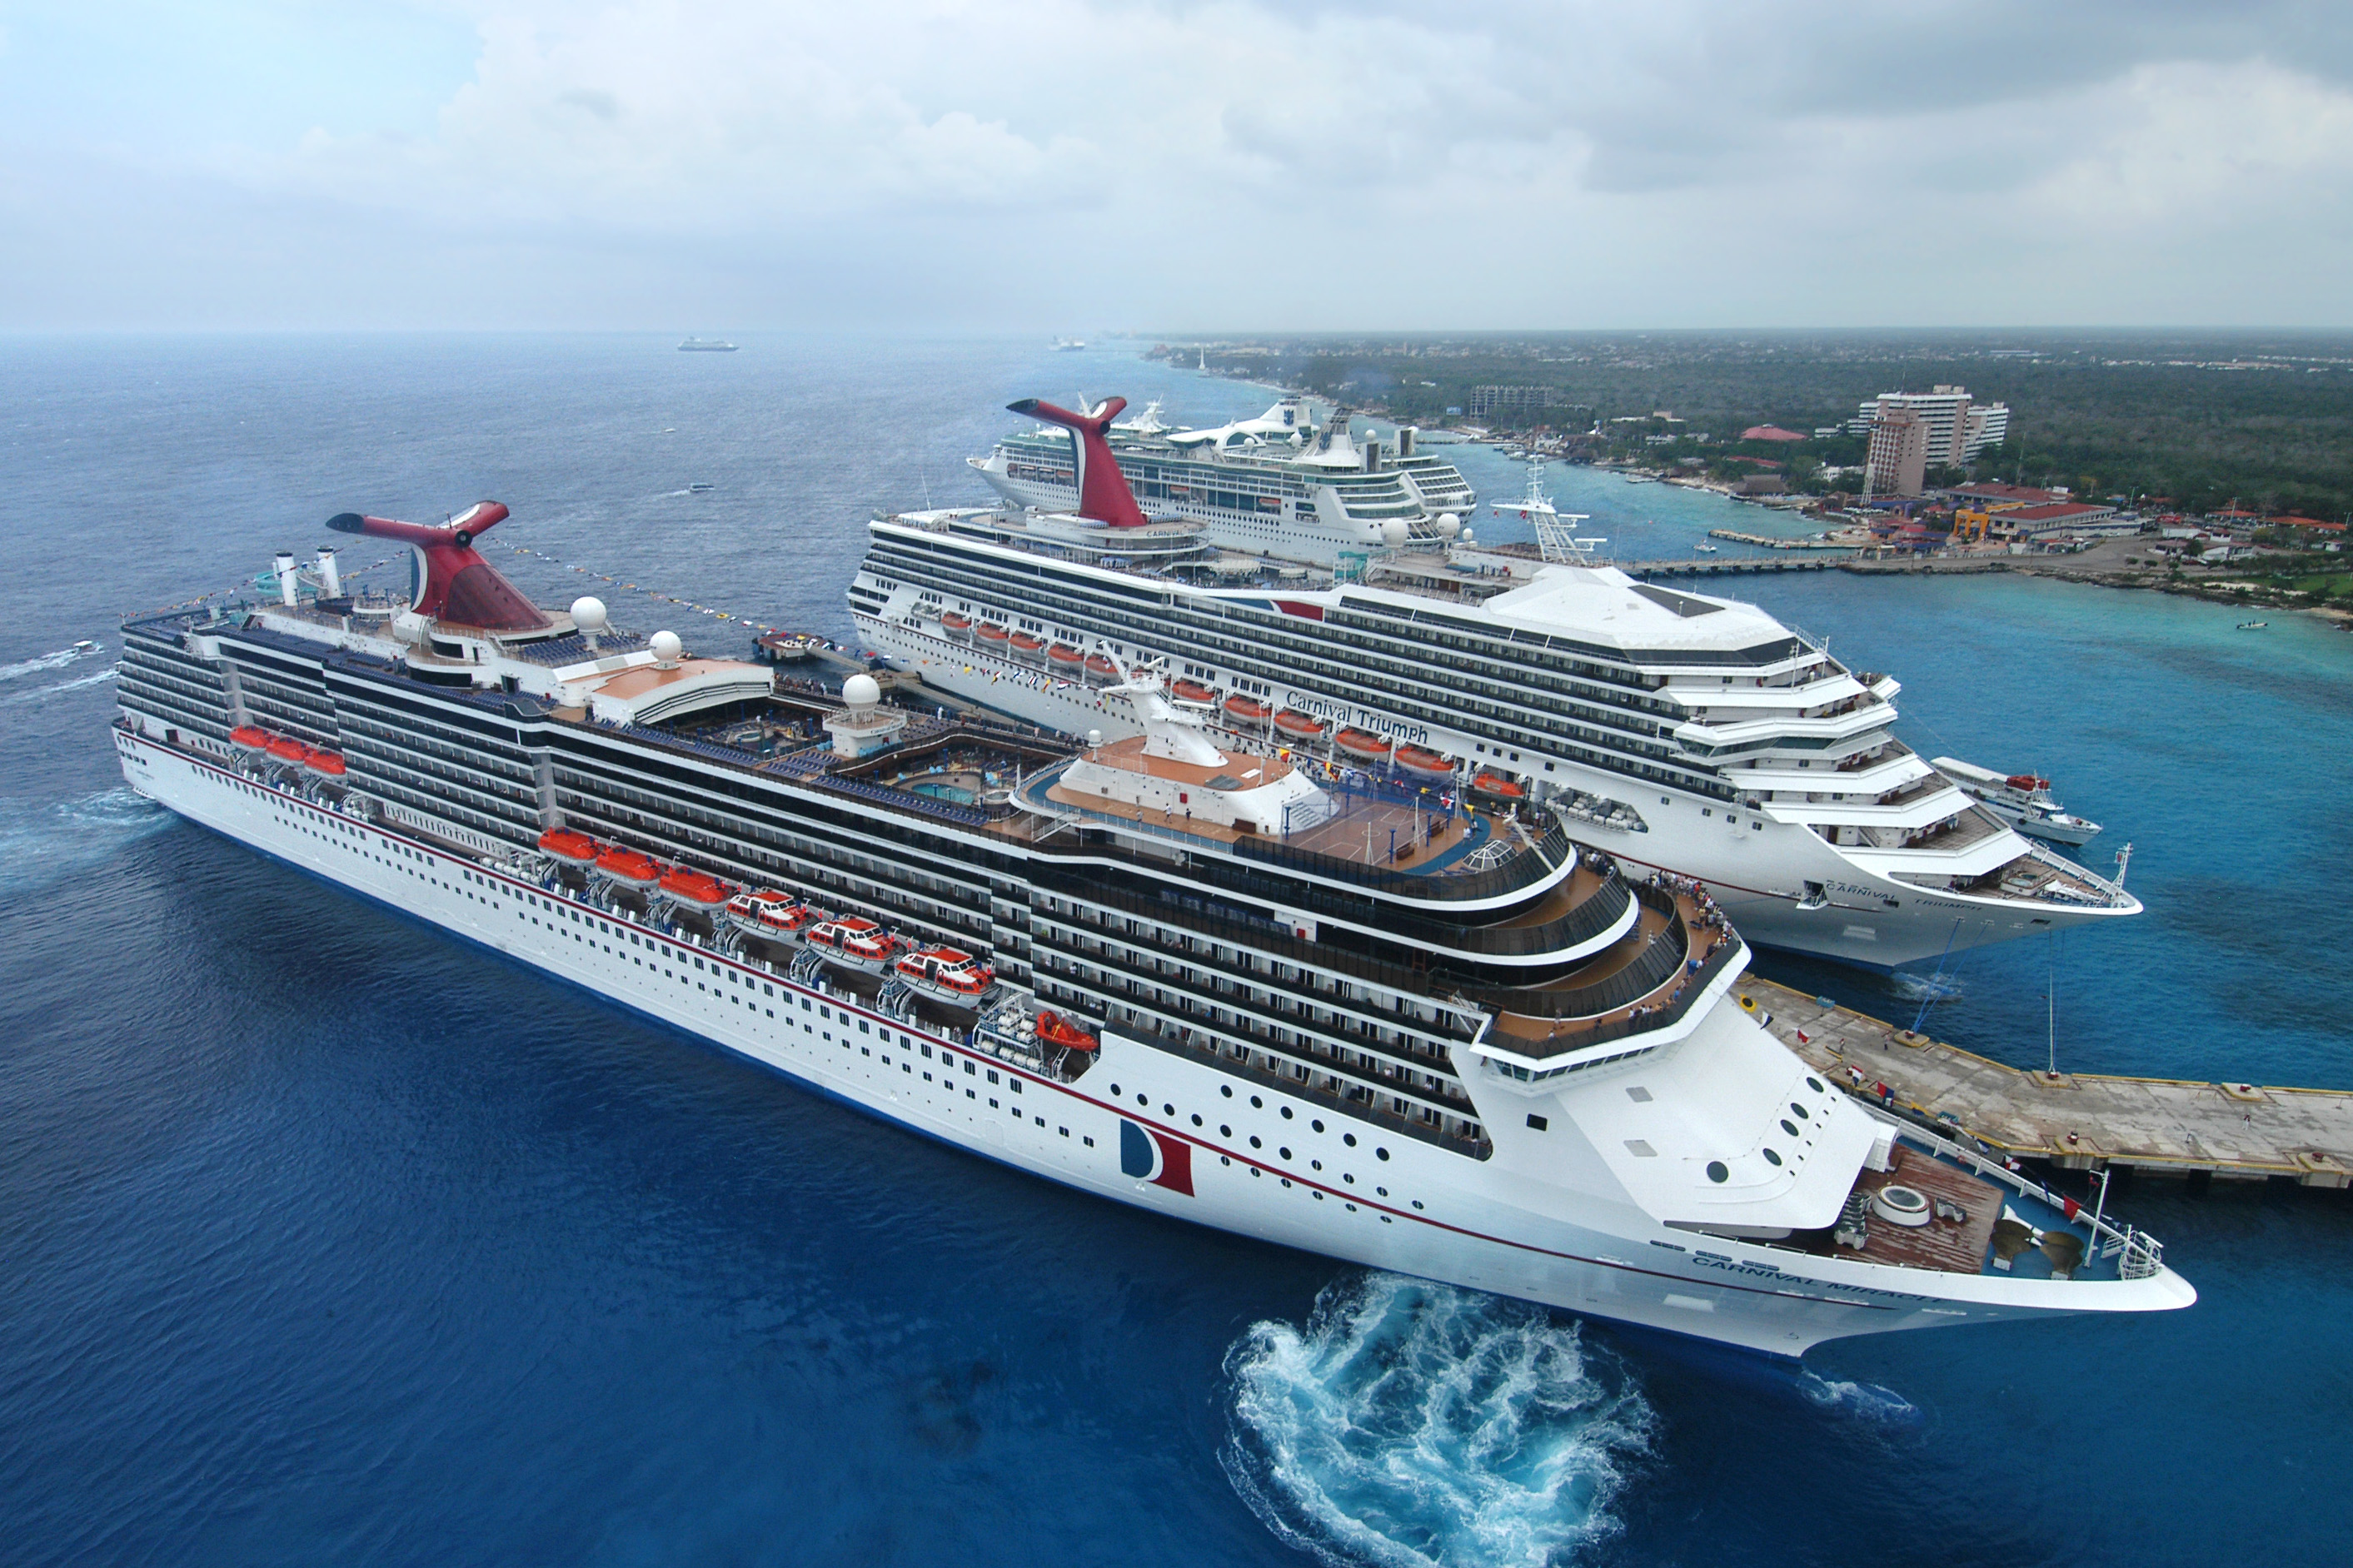 Carnival Miracle and other ships docked in Cozumel